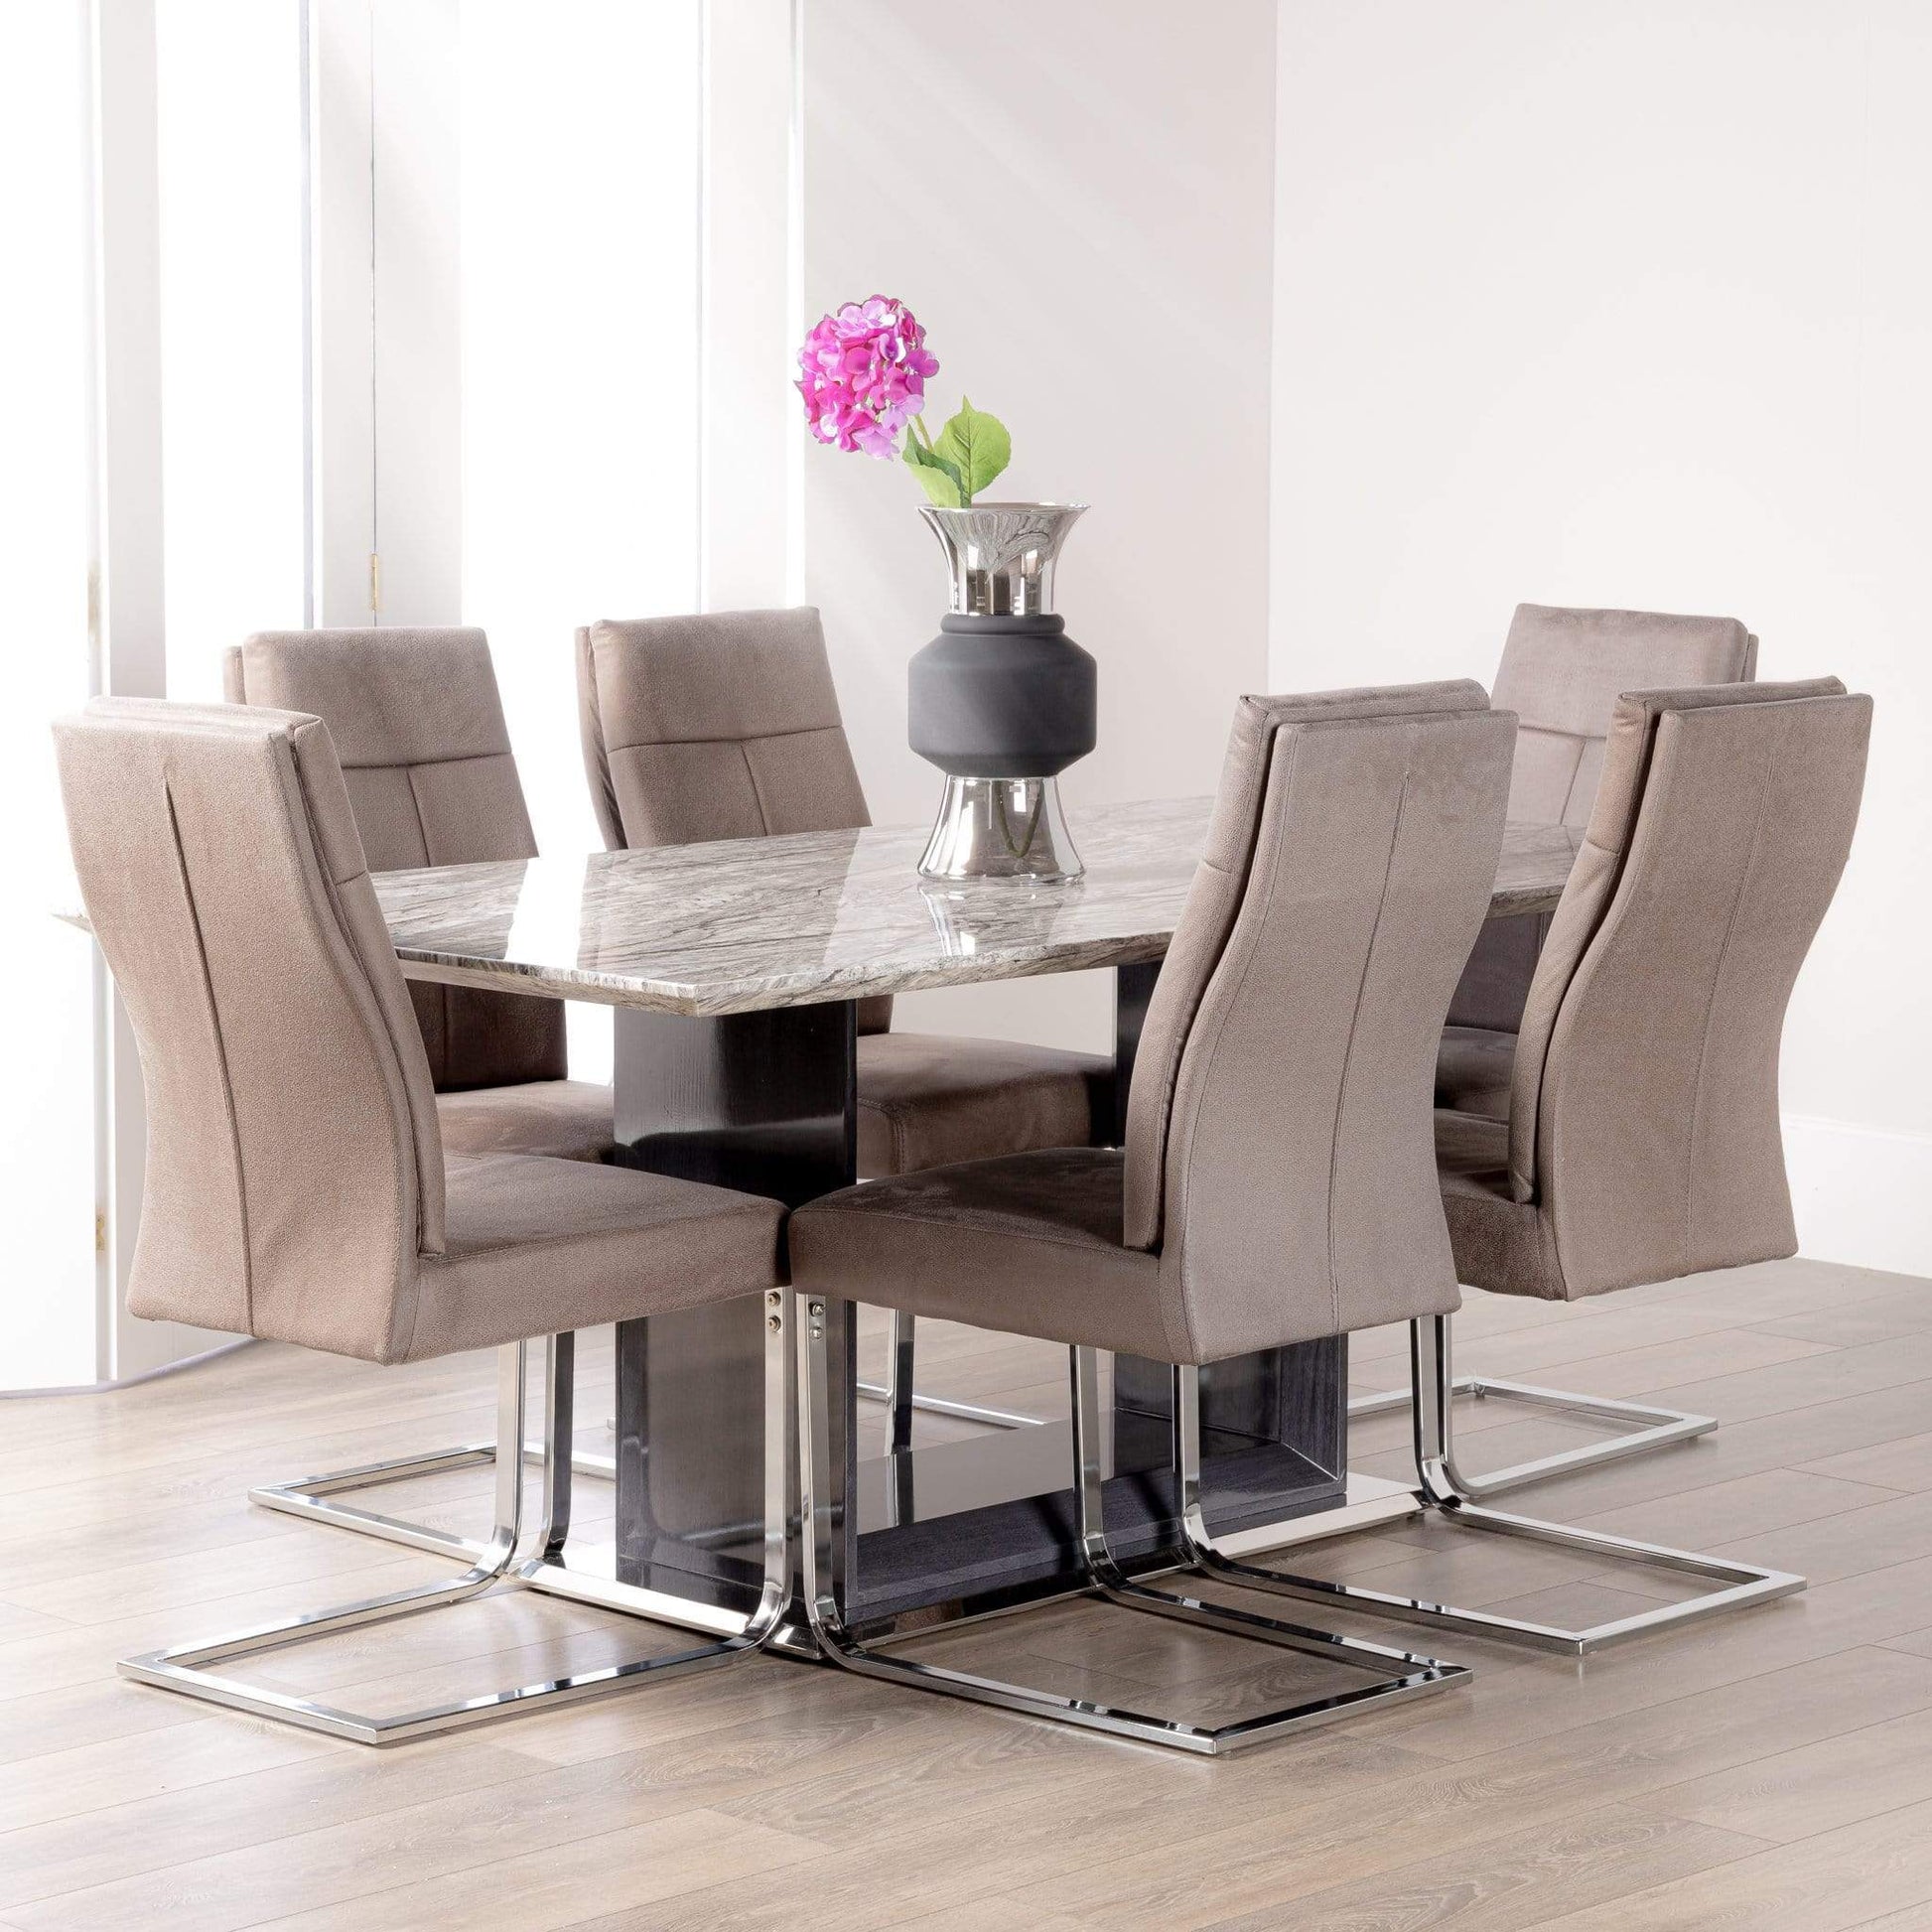 Furniture  -  Helena Grey Marble Dining Table Set with 6 Volcara Dining Chairs  -  50140785